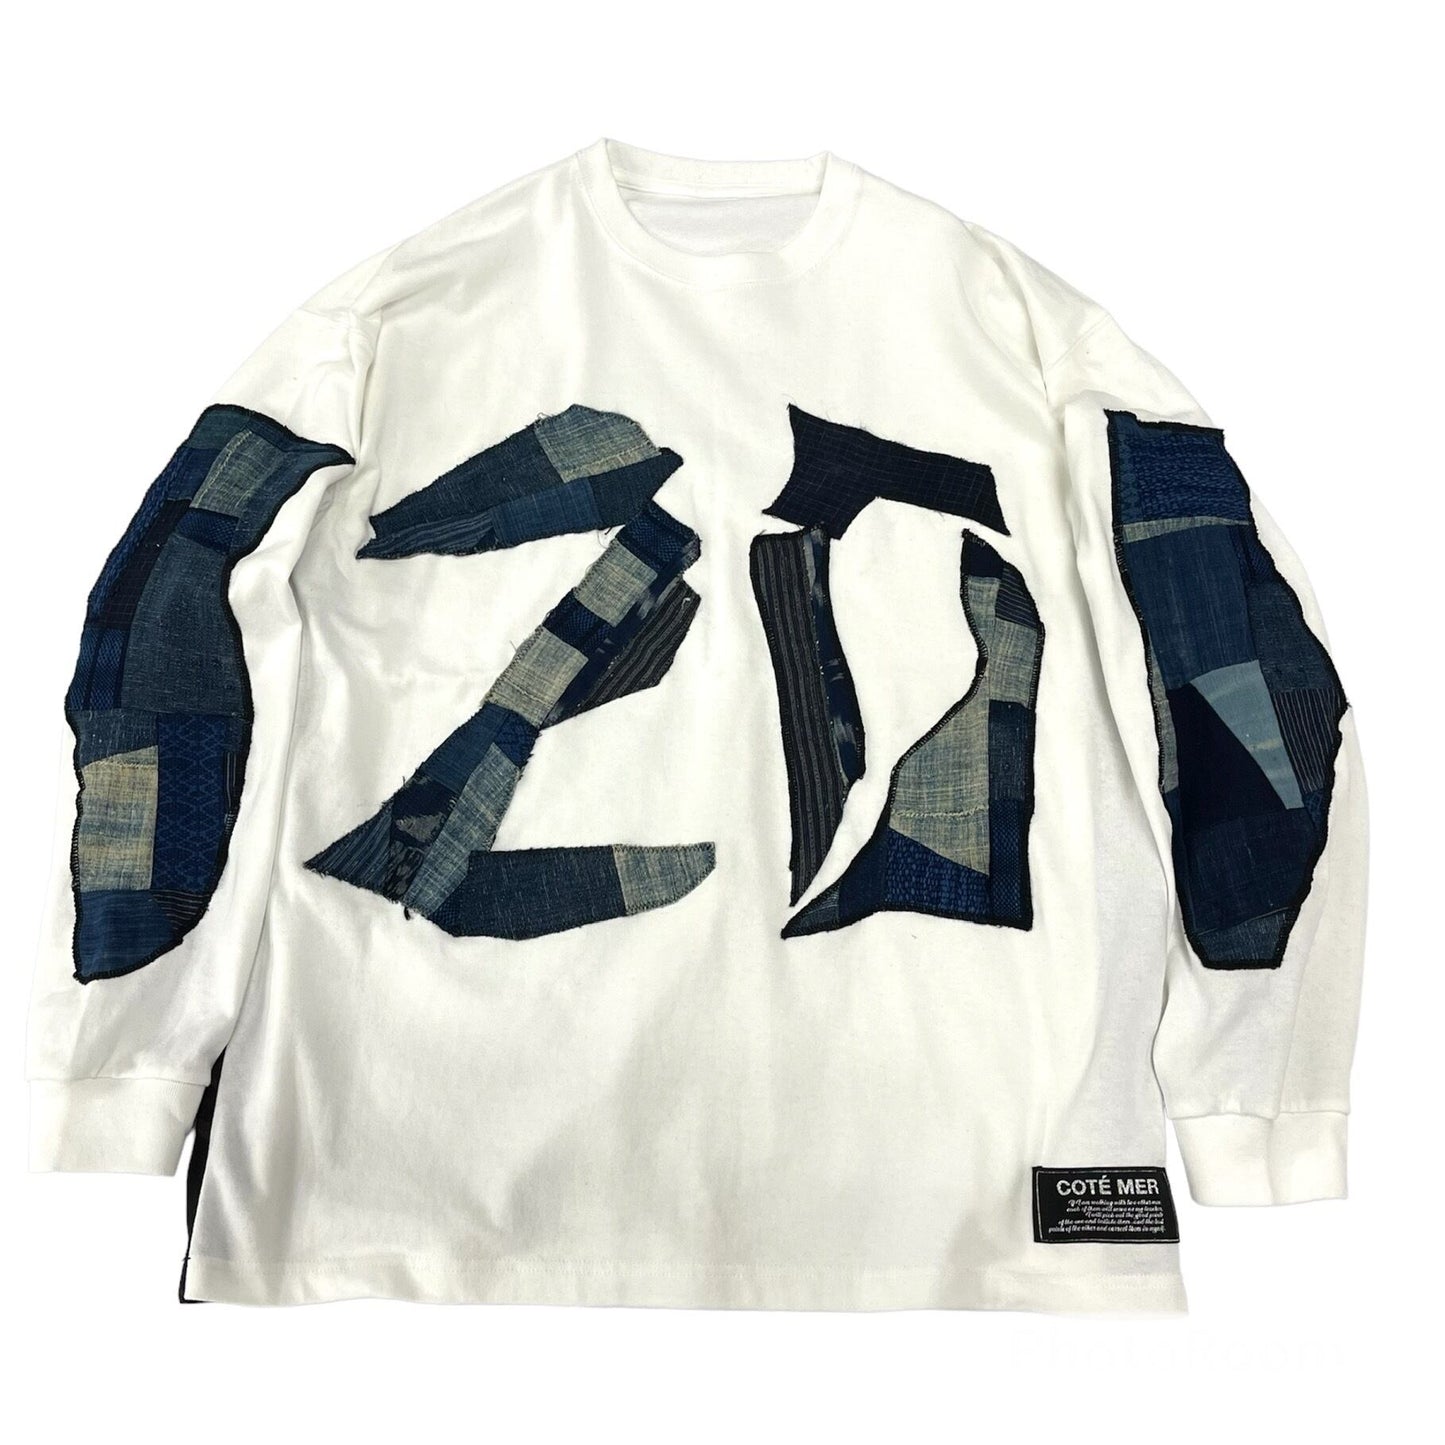 Bespoke Hypebeast Japanese Vintage Aozome "Indigo Number 20" Handmade Custom One and Only One Cote Mer Upcycle Sustainable Upscale Street Fashion Embroidered Embroidery Kimono Obi Boro Patchwork Remake Long Tee T T-shirt ( Size : XL )